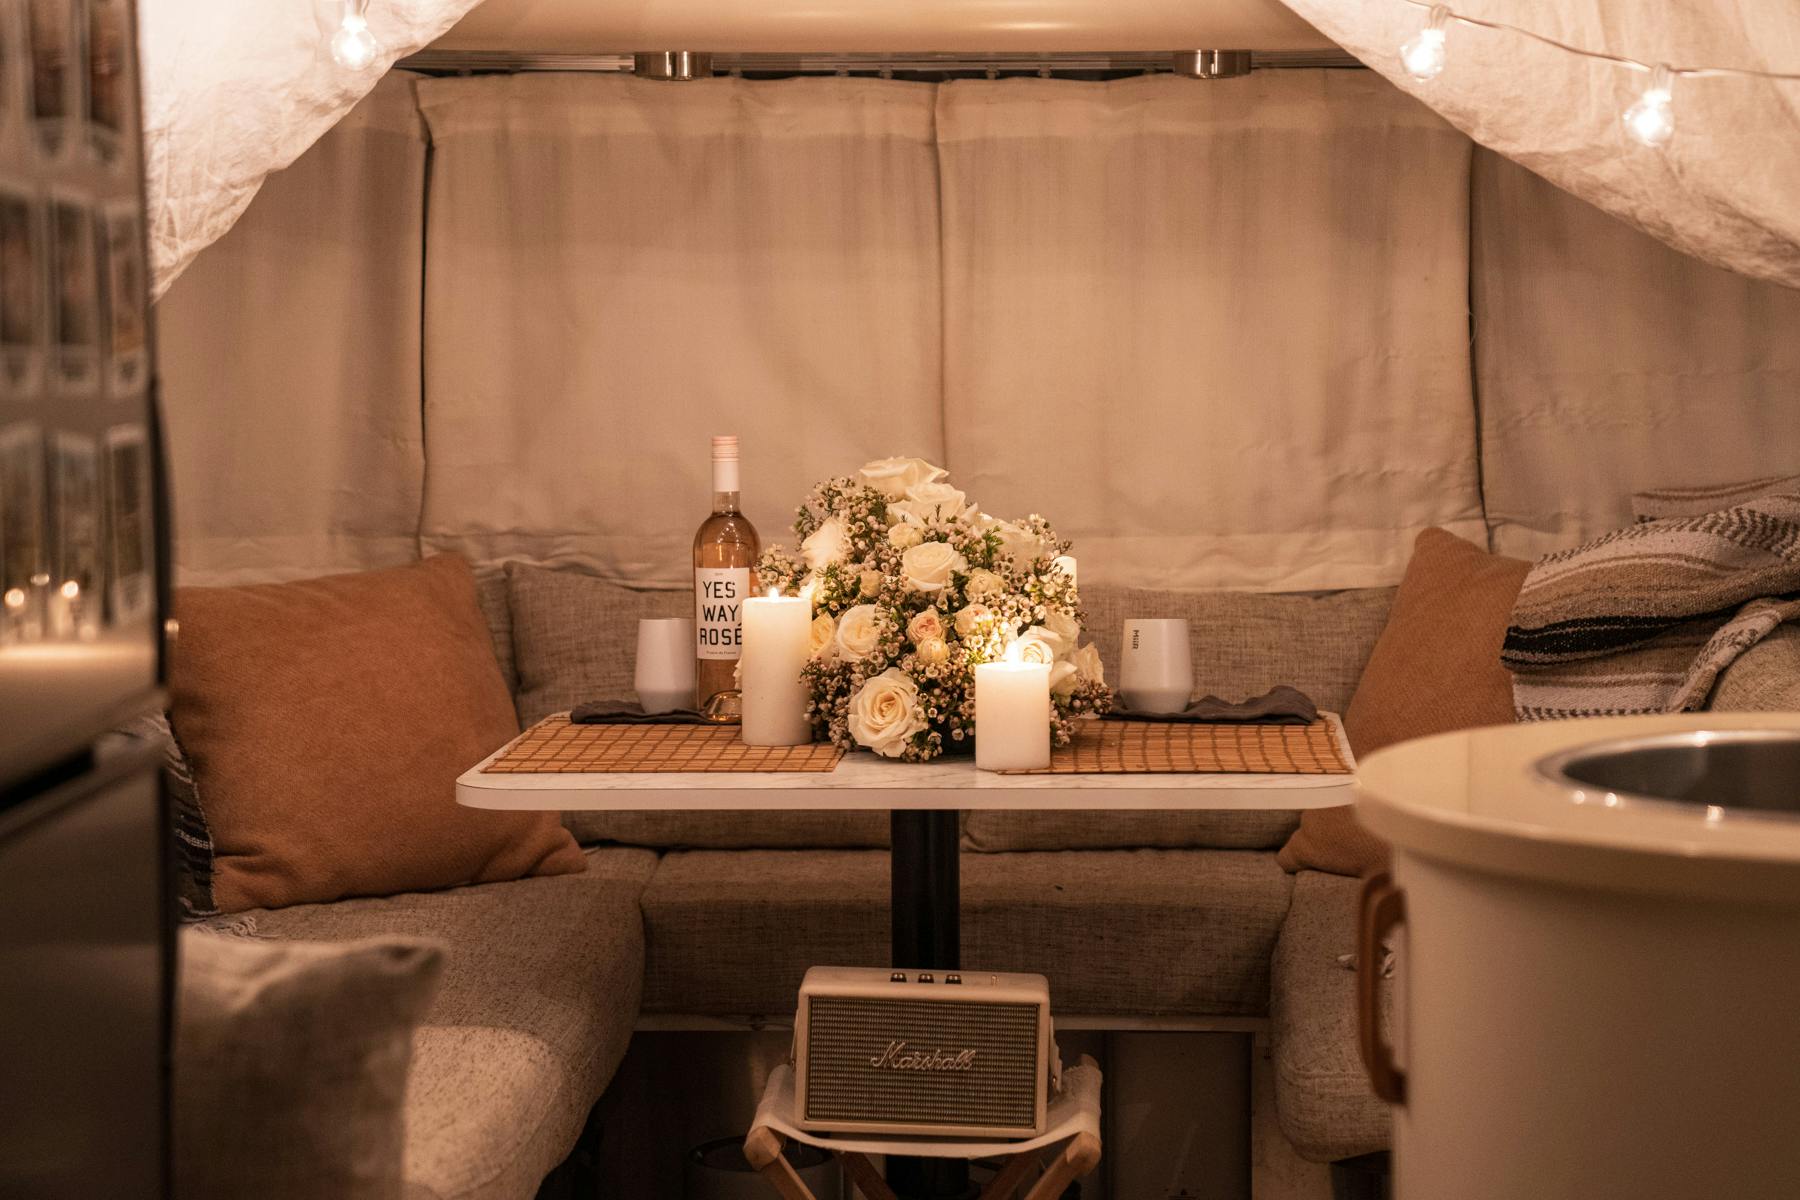 How to Have Date Night in the RV